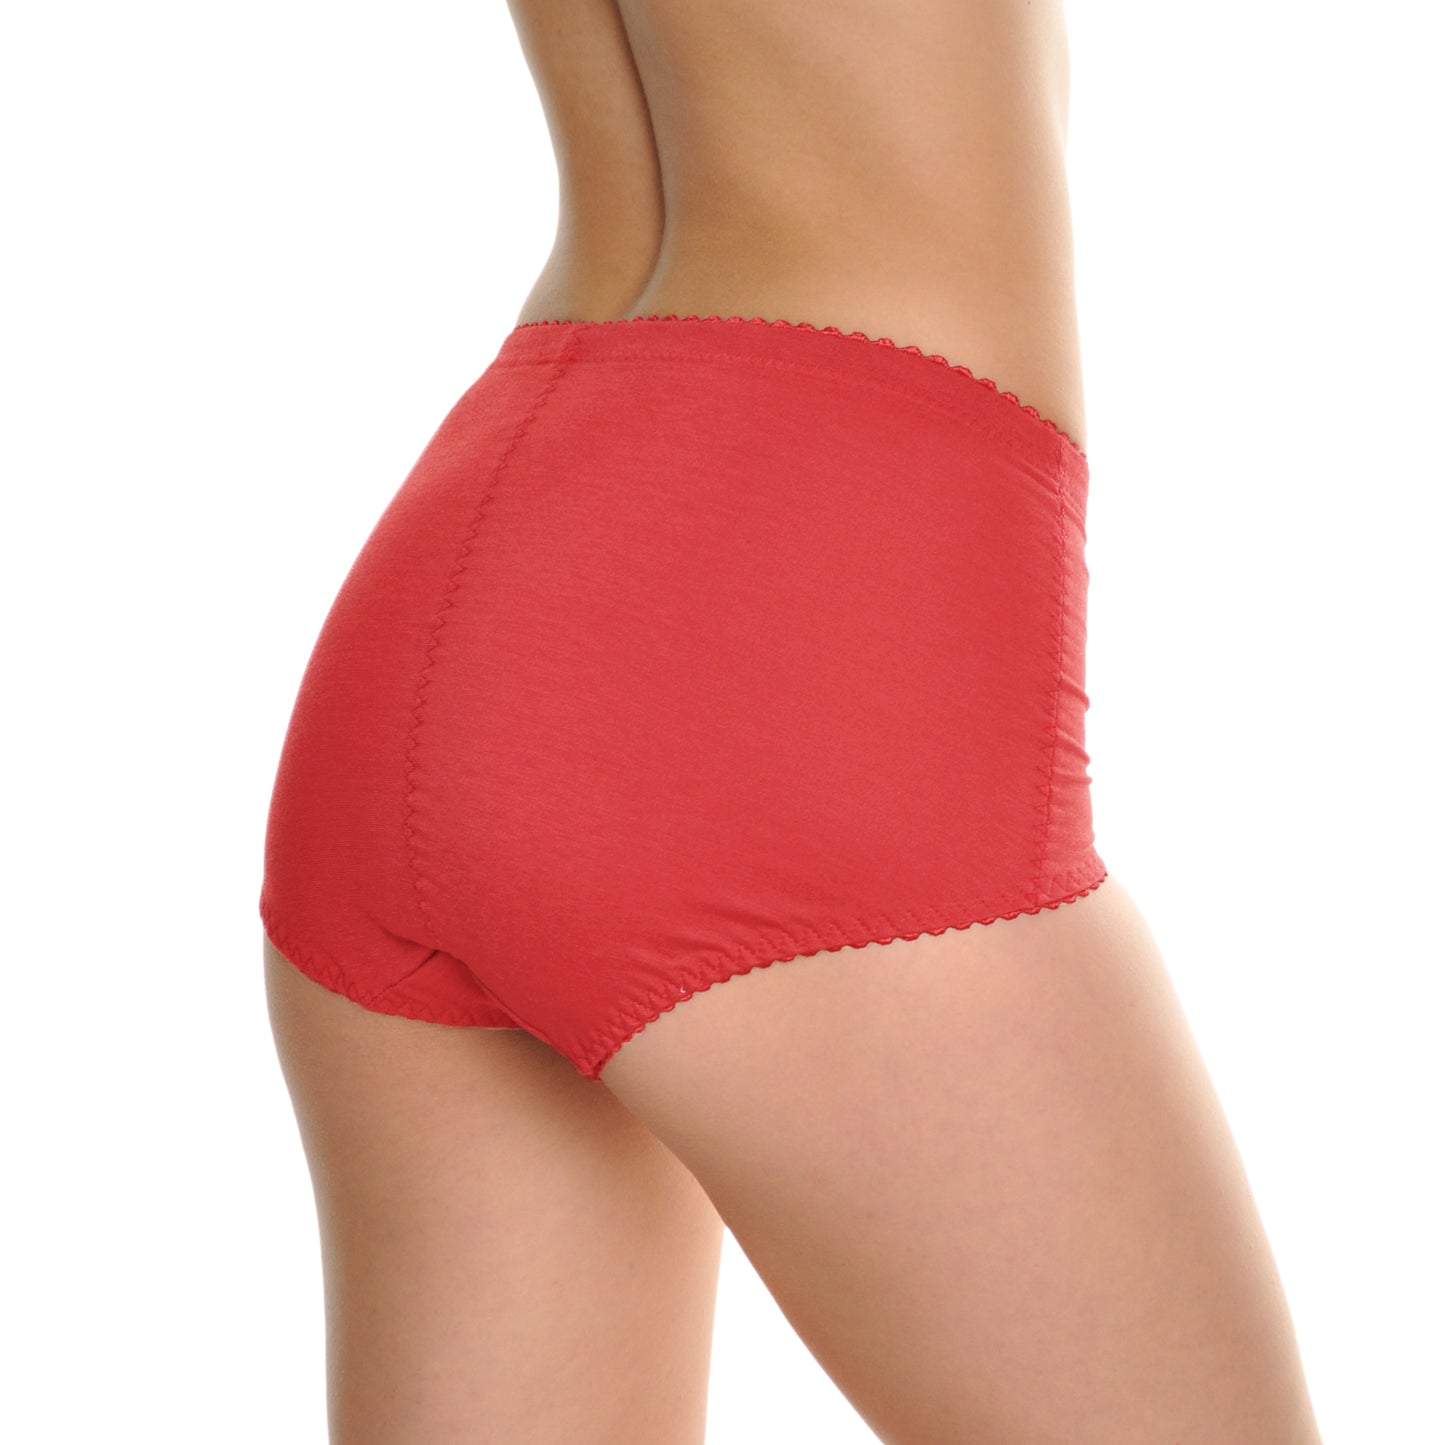 Angelina Cotton High Waist Girdle with Zippered Pocket (12-Pack), #G940